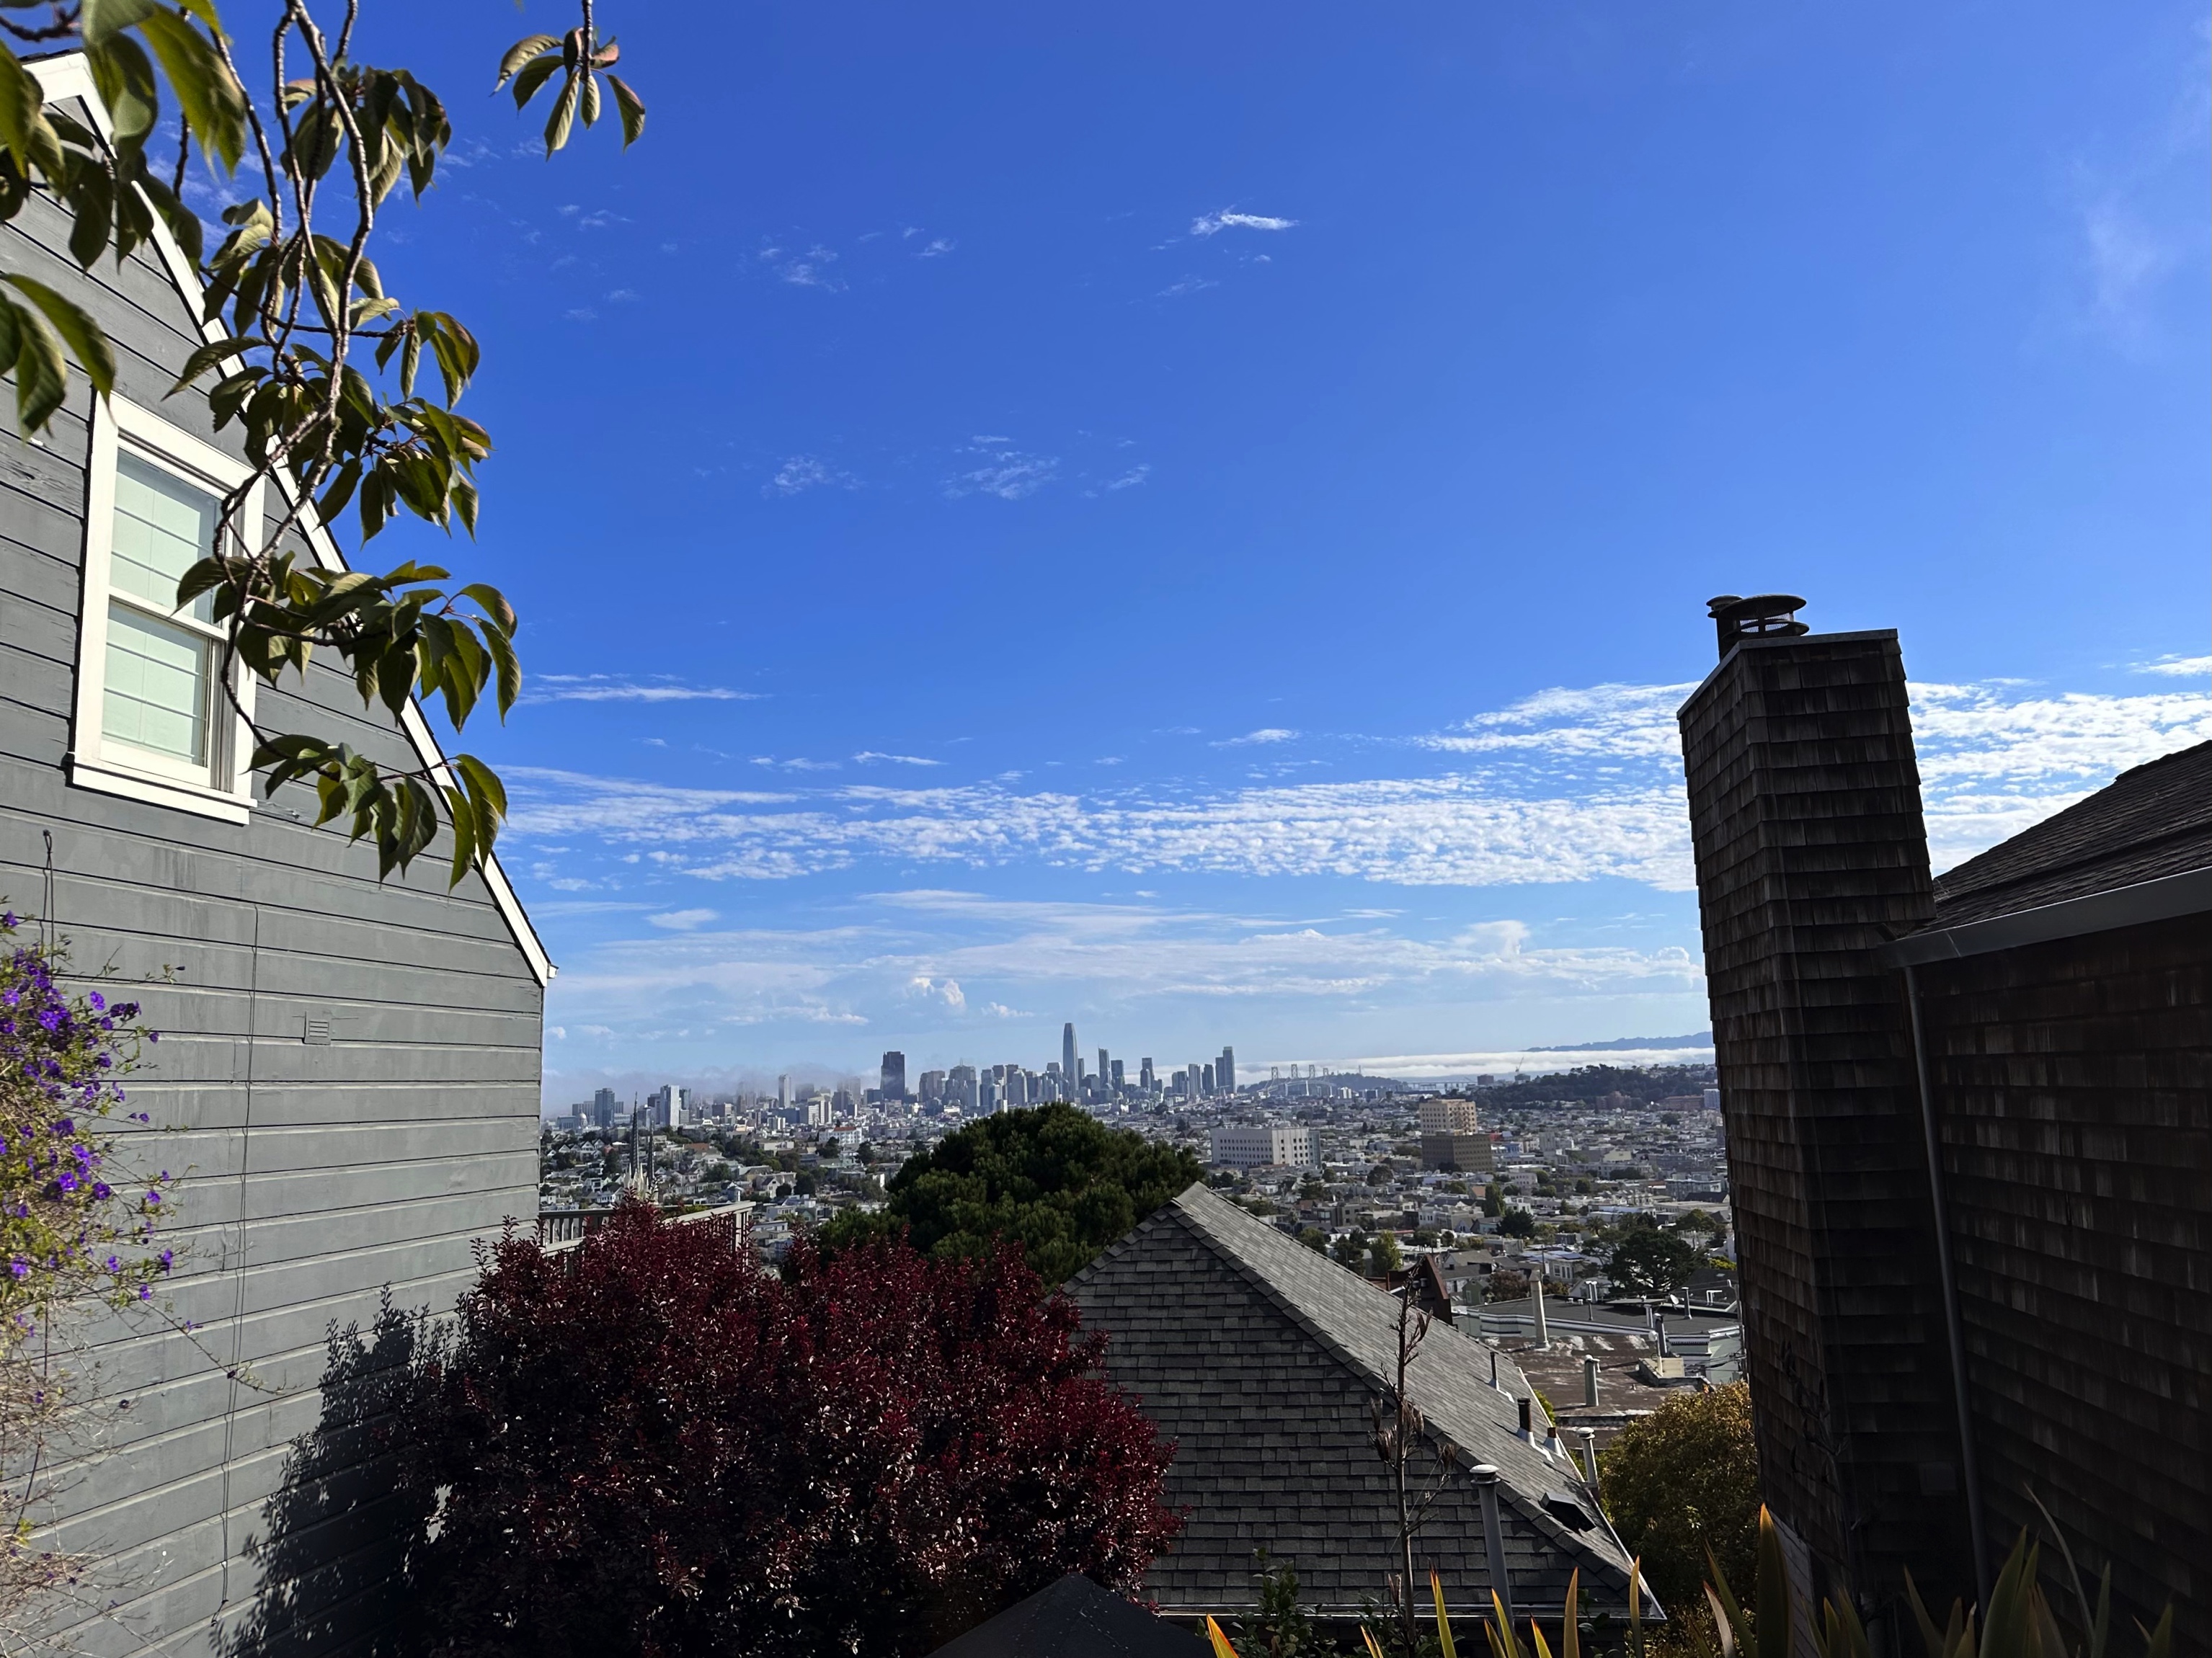 A picture of San Francisco